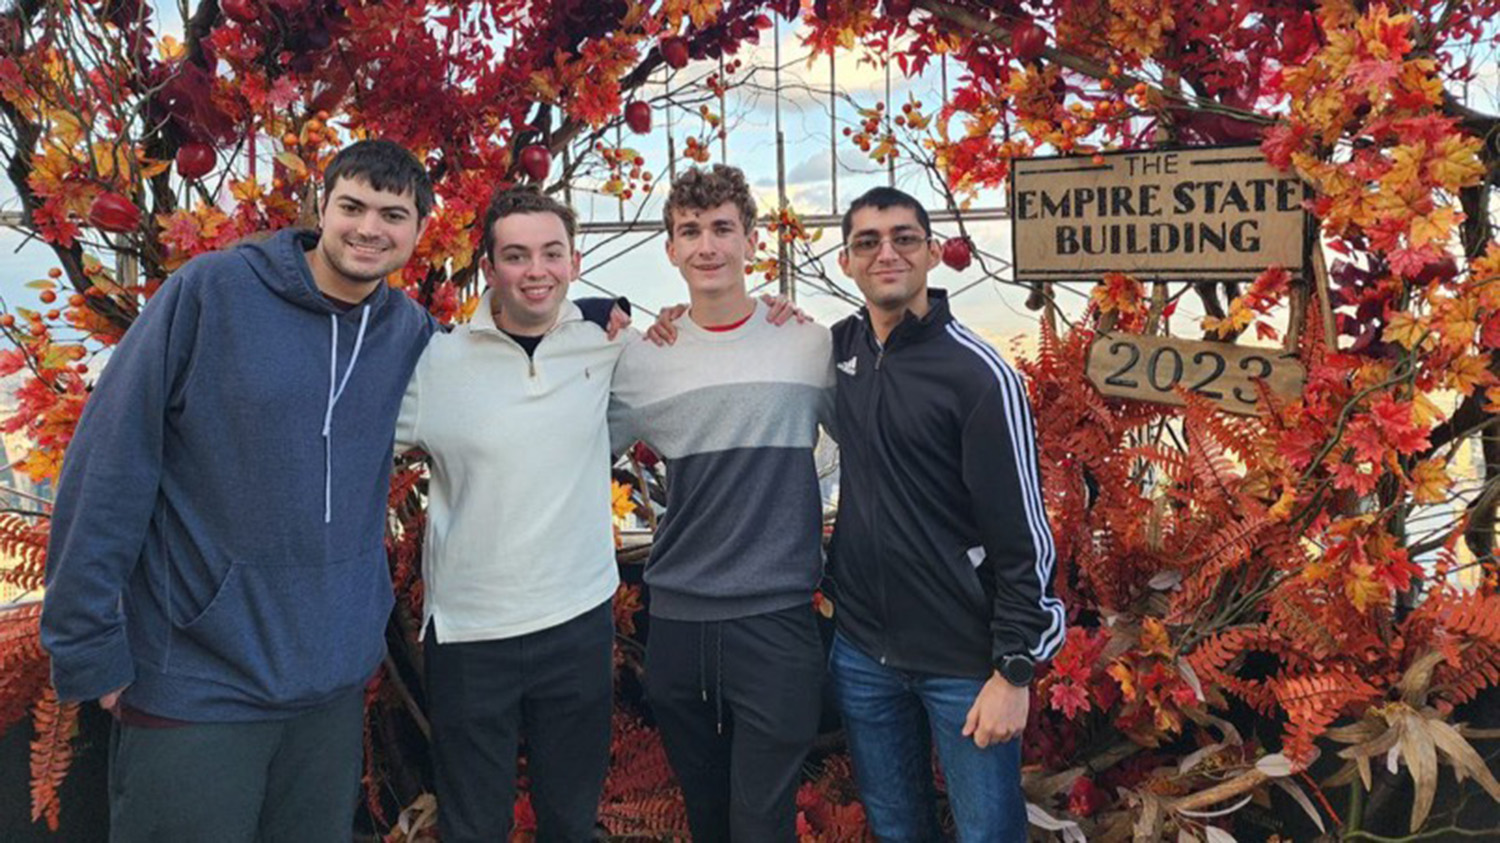 Pictured left to right: Hunter Brown, Patrick Finkbiner, Charlie Pletzke, and Kanv Khare stand together at the top of the Empire State Building.